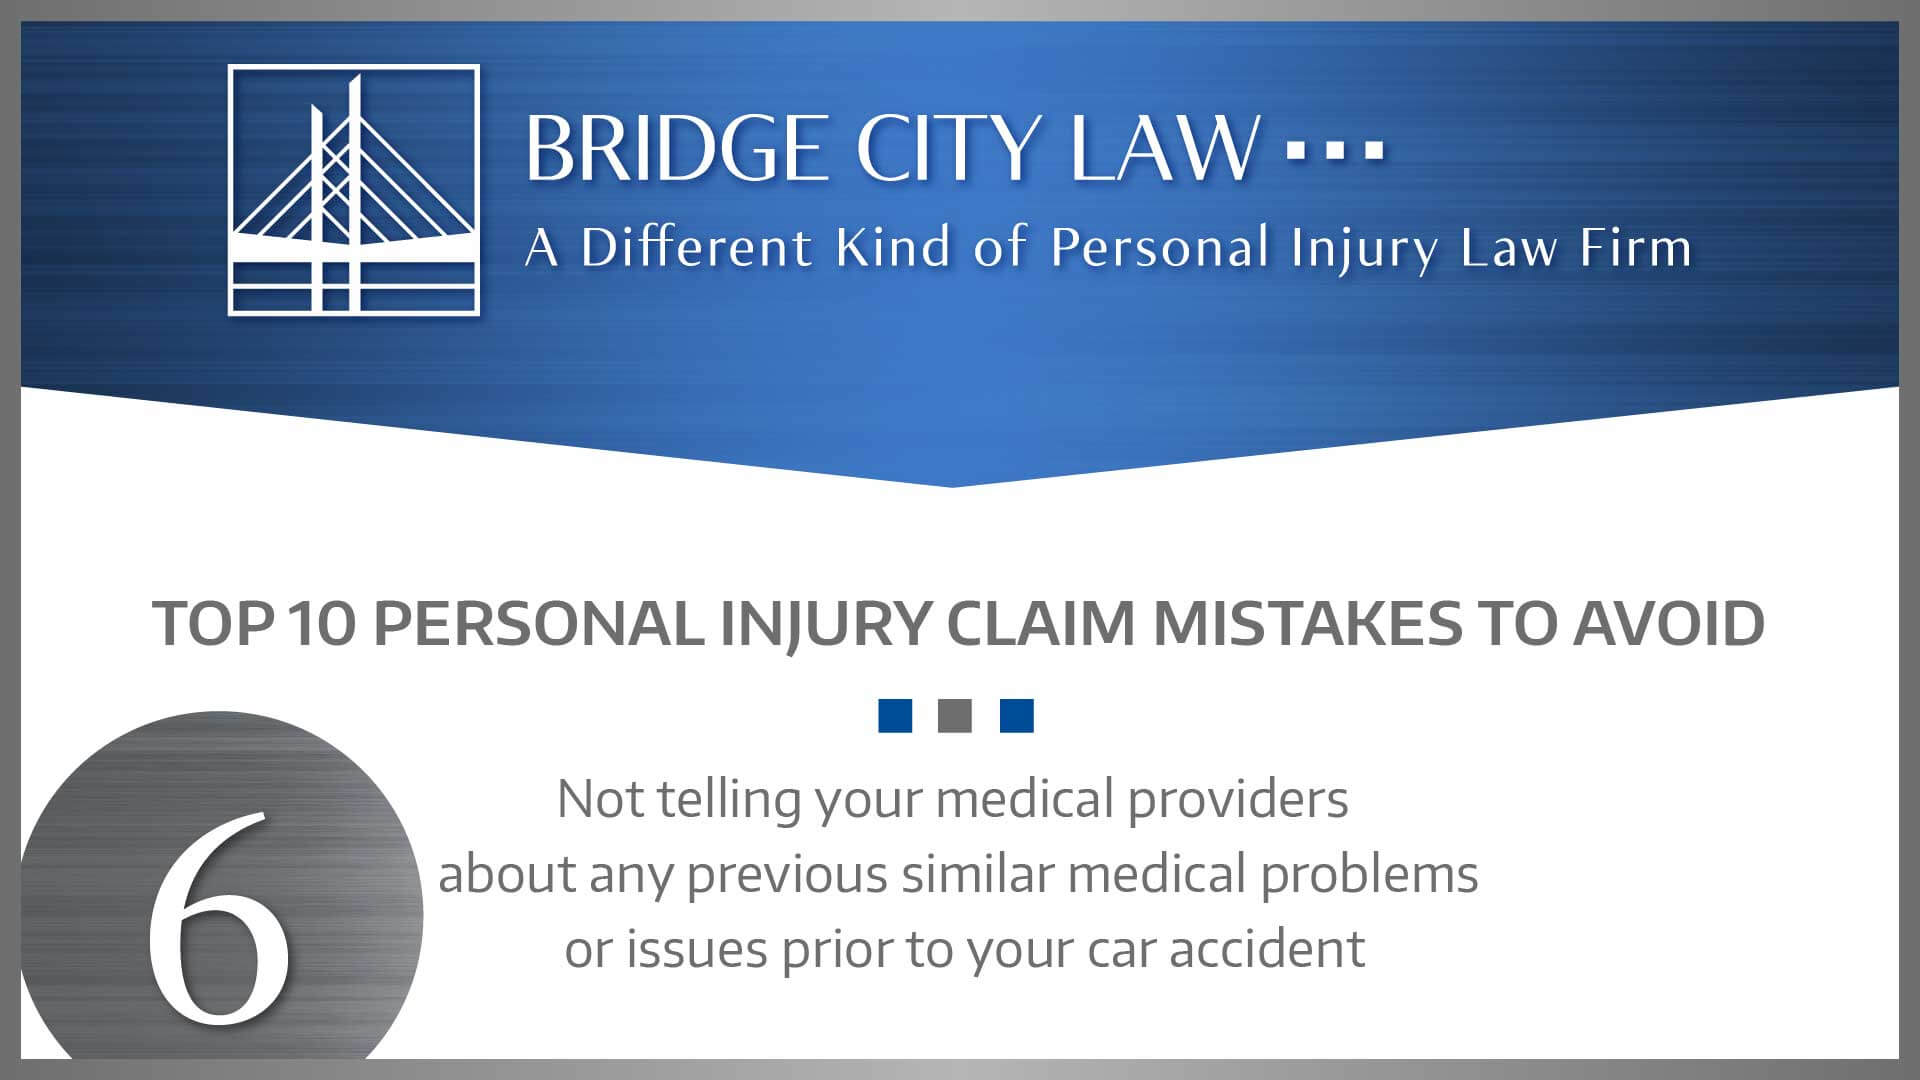 #6 MISTAKE: Not telling your medical providers about any previous similar medical problems or issues prior to your car accident